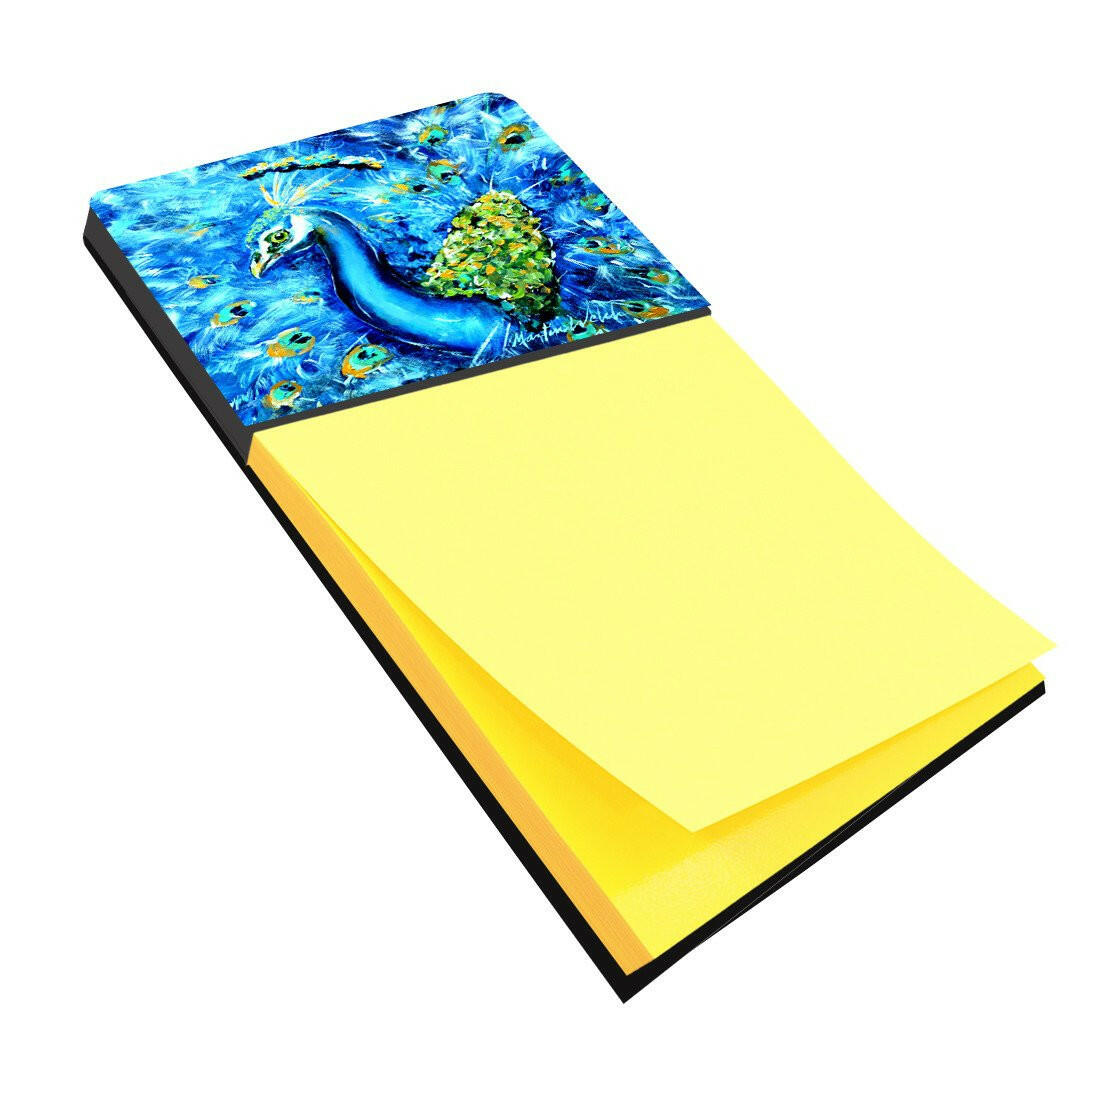 Peacock Straight Up in Blue Refiillable Sticky Note Holder or Postit Note Dispenser MW1166SN by Caroline's Treasures